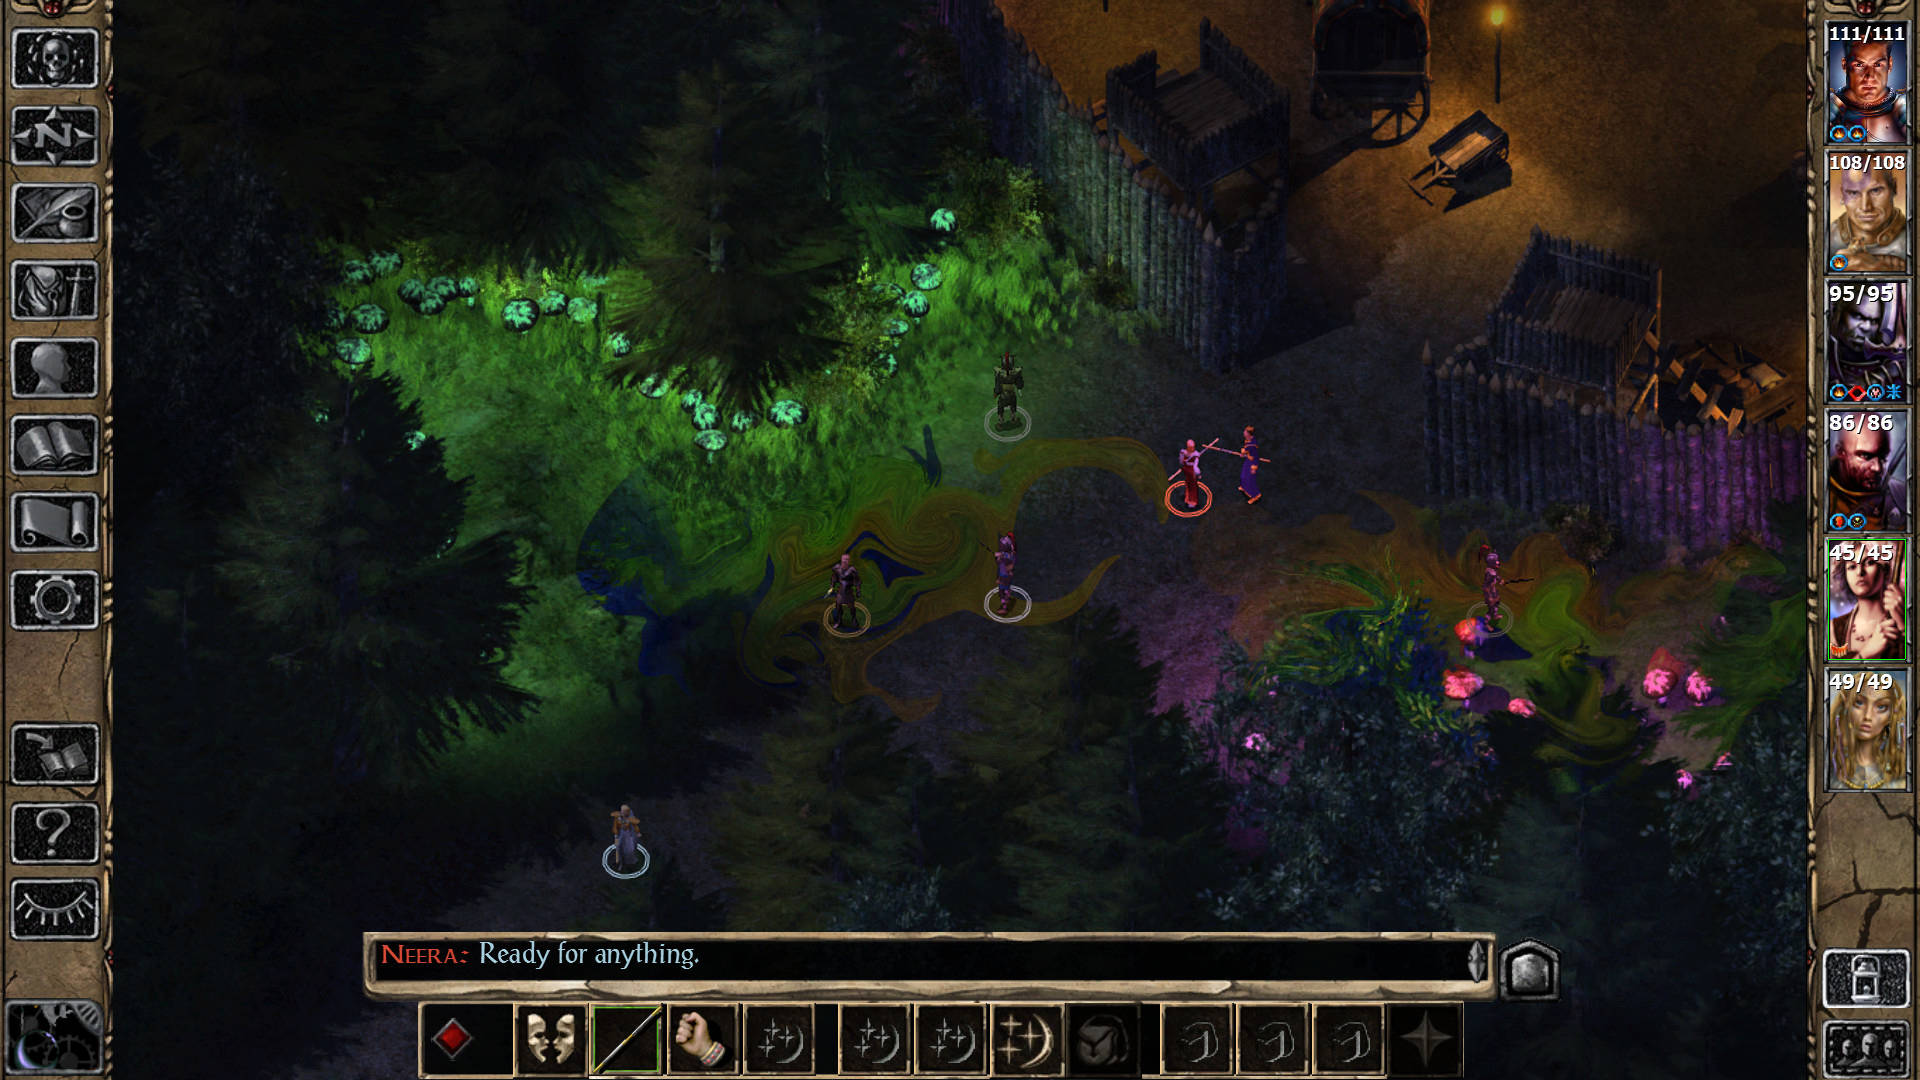 Exploring the outskirts of a magic forest in Baldur's Gate 2, one of the best DnD games.